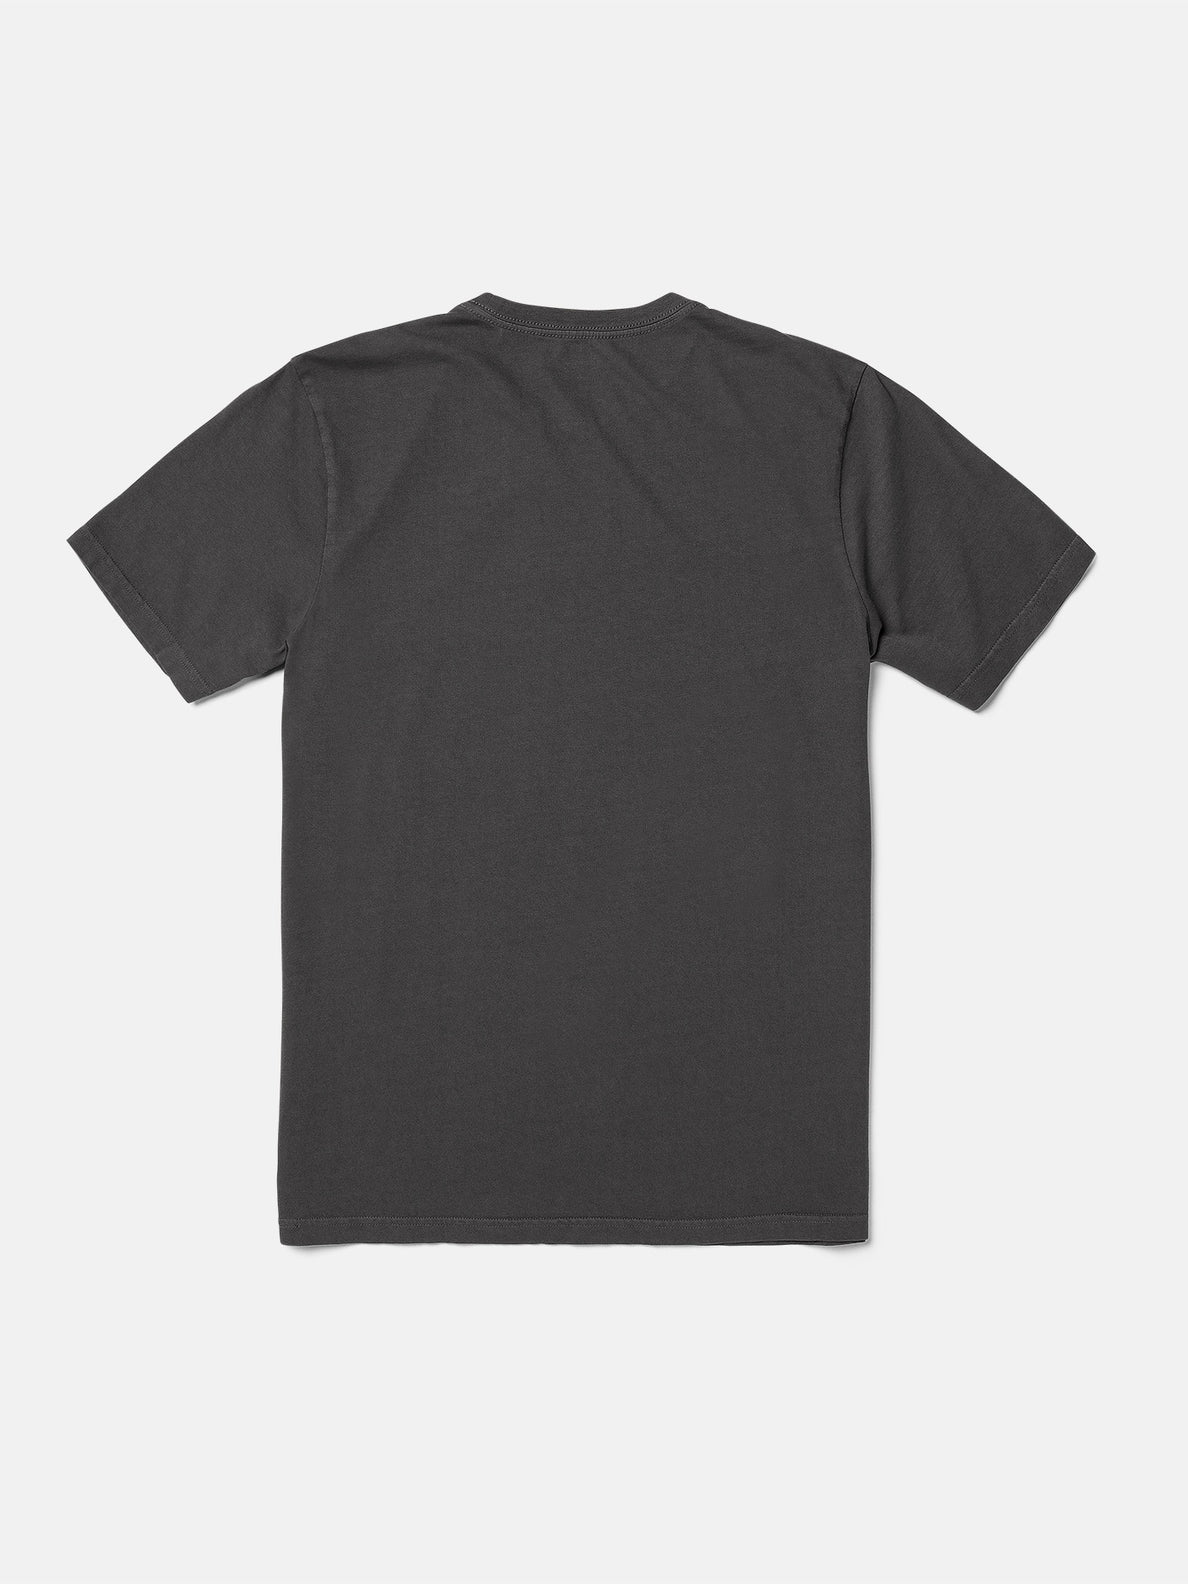 Wall Puncher Short Sleeve Tee - Stealth